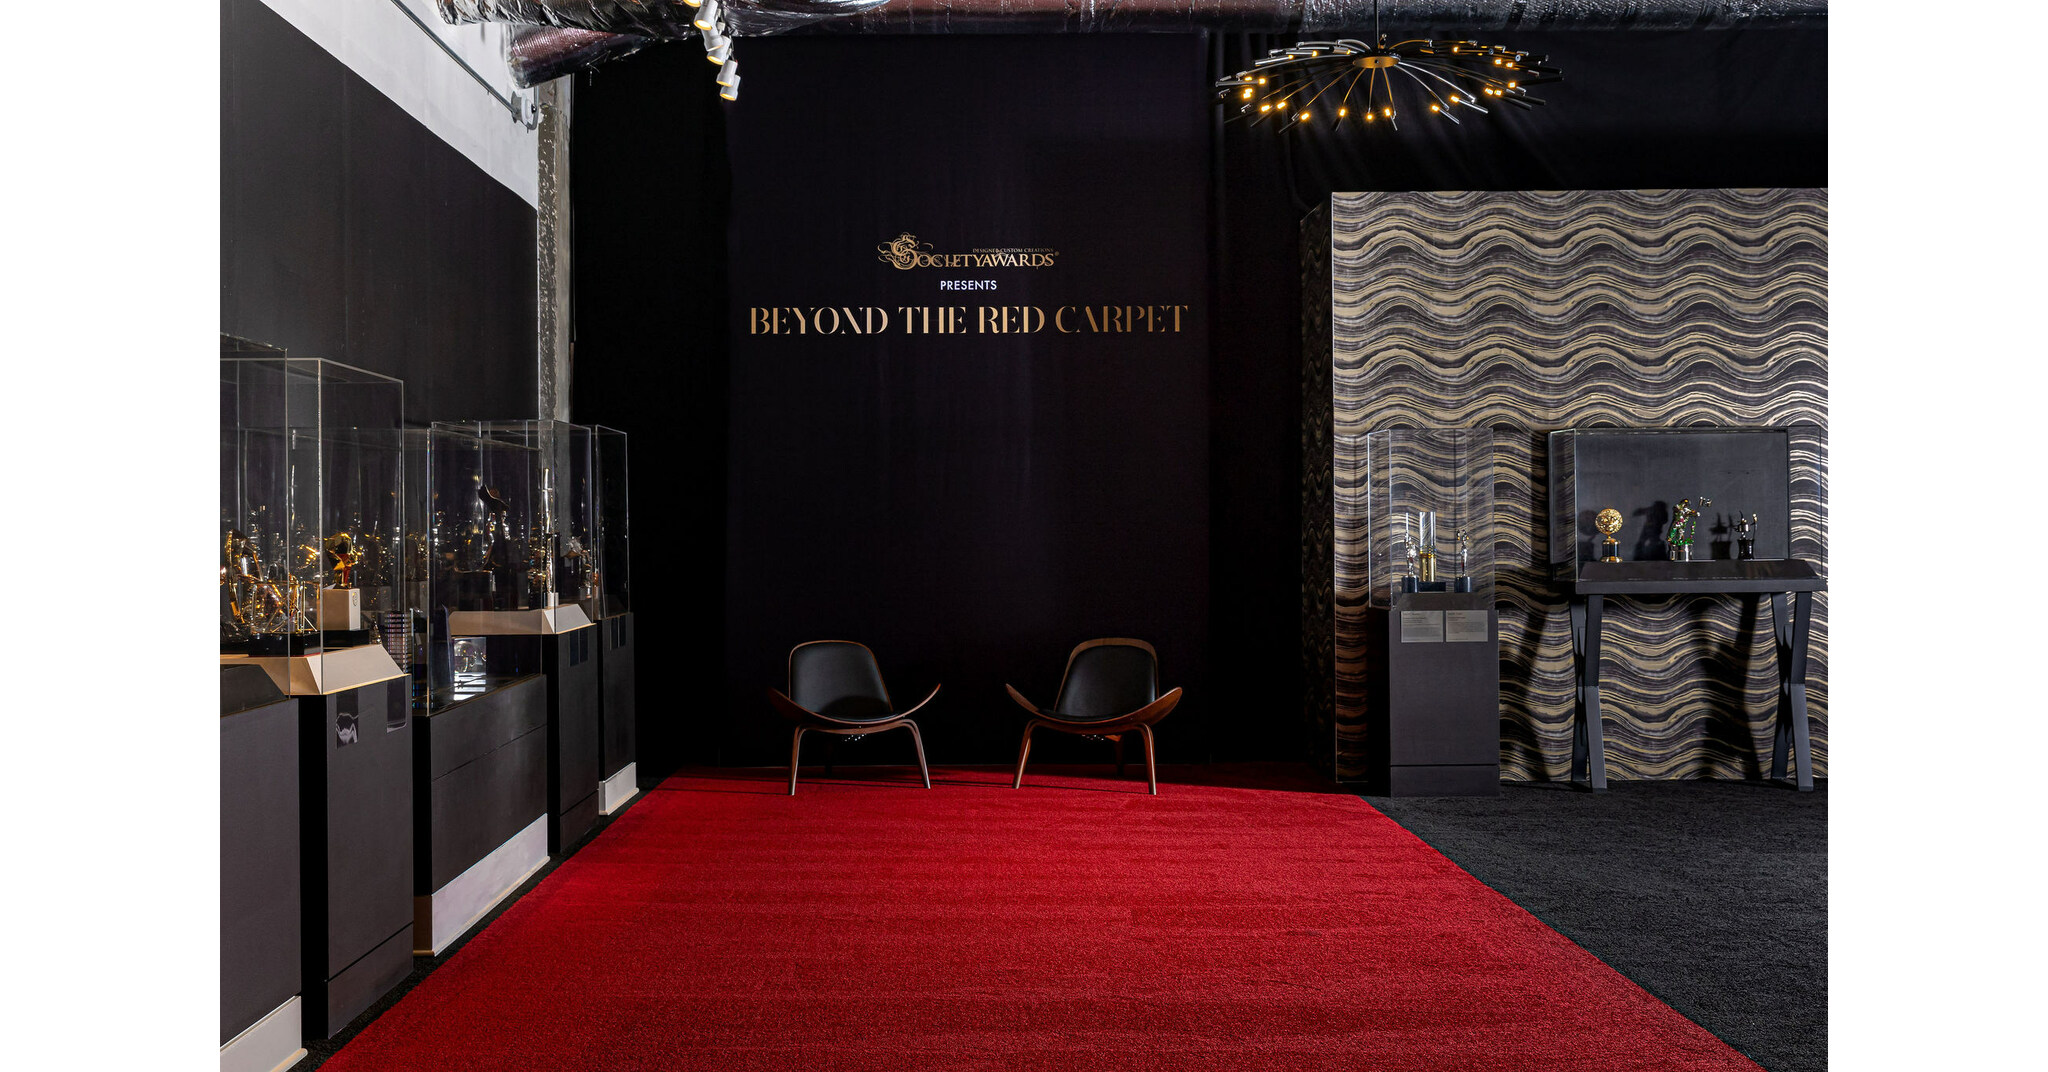 Beyond the Red Carpet presents an unprecedented range of globally renowned  awards as fine art, cultural treasures and corporate masterpieces